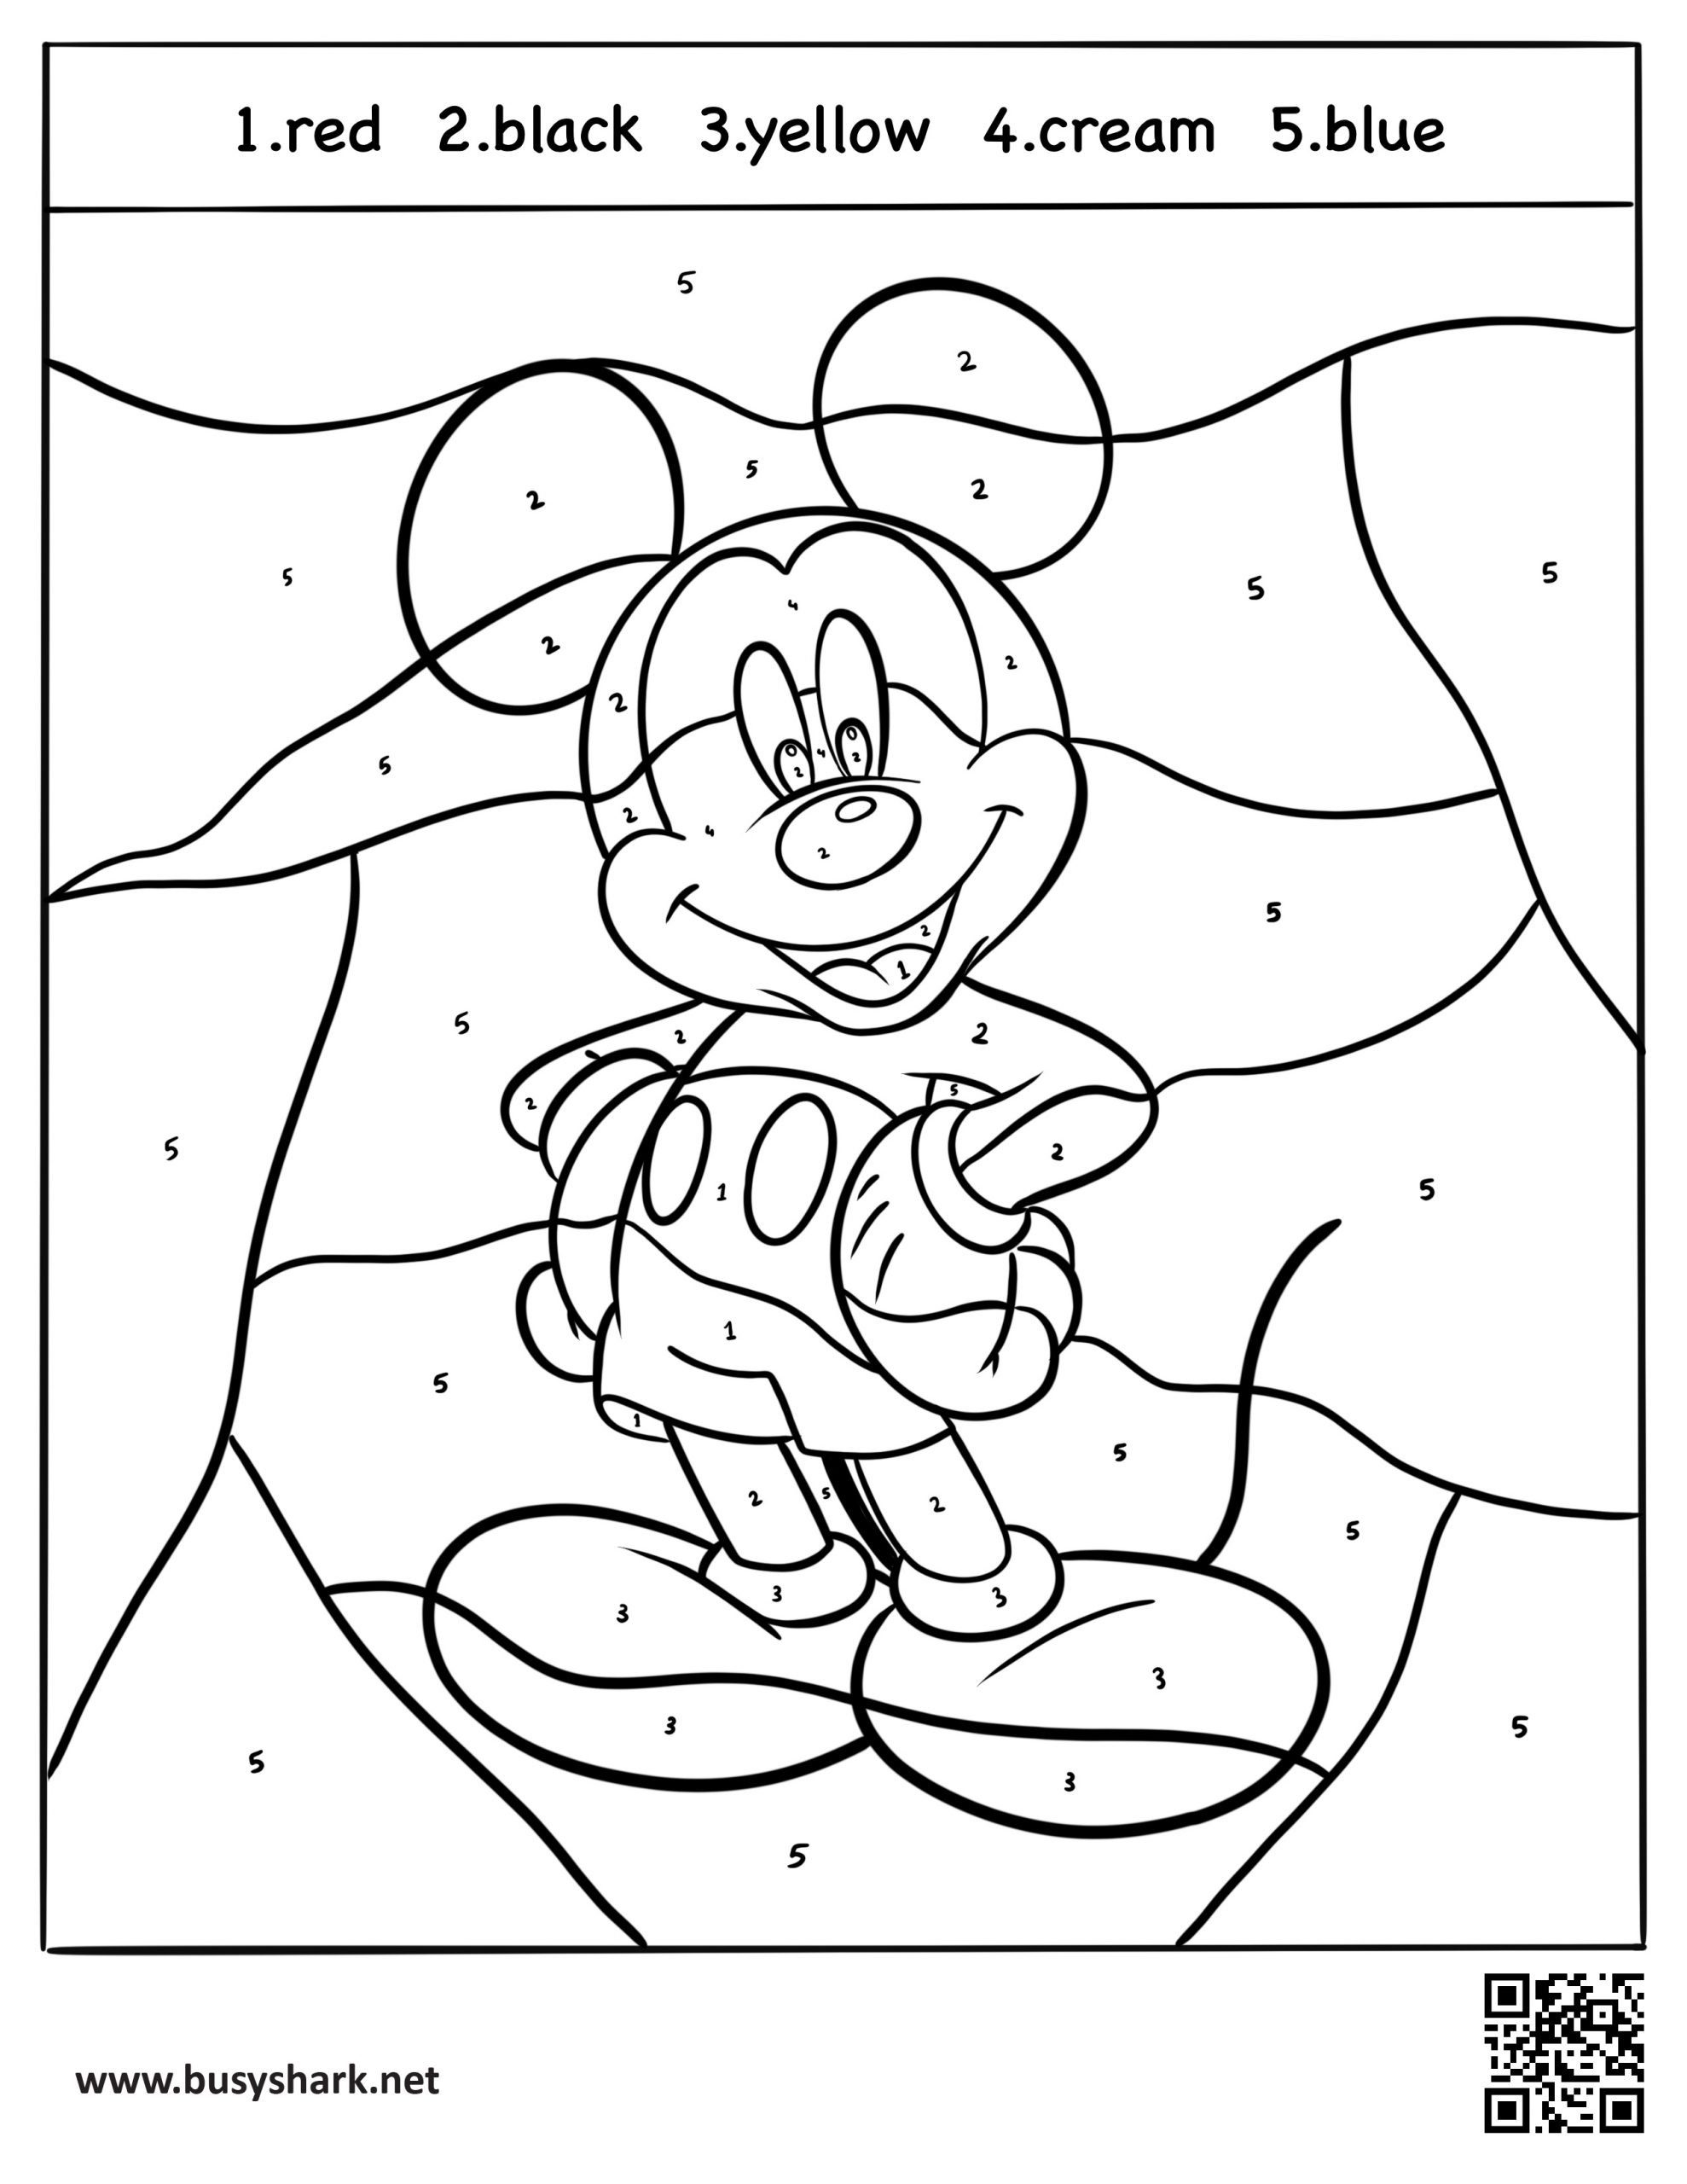 Mickey mouse color by number coloring page